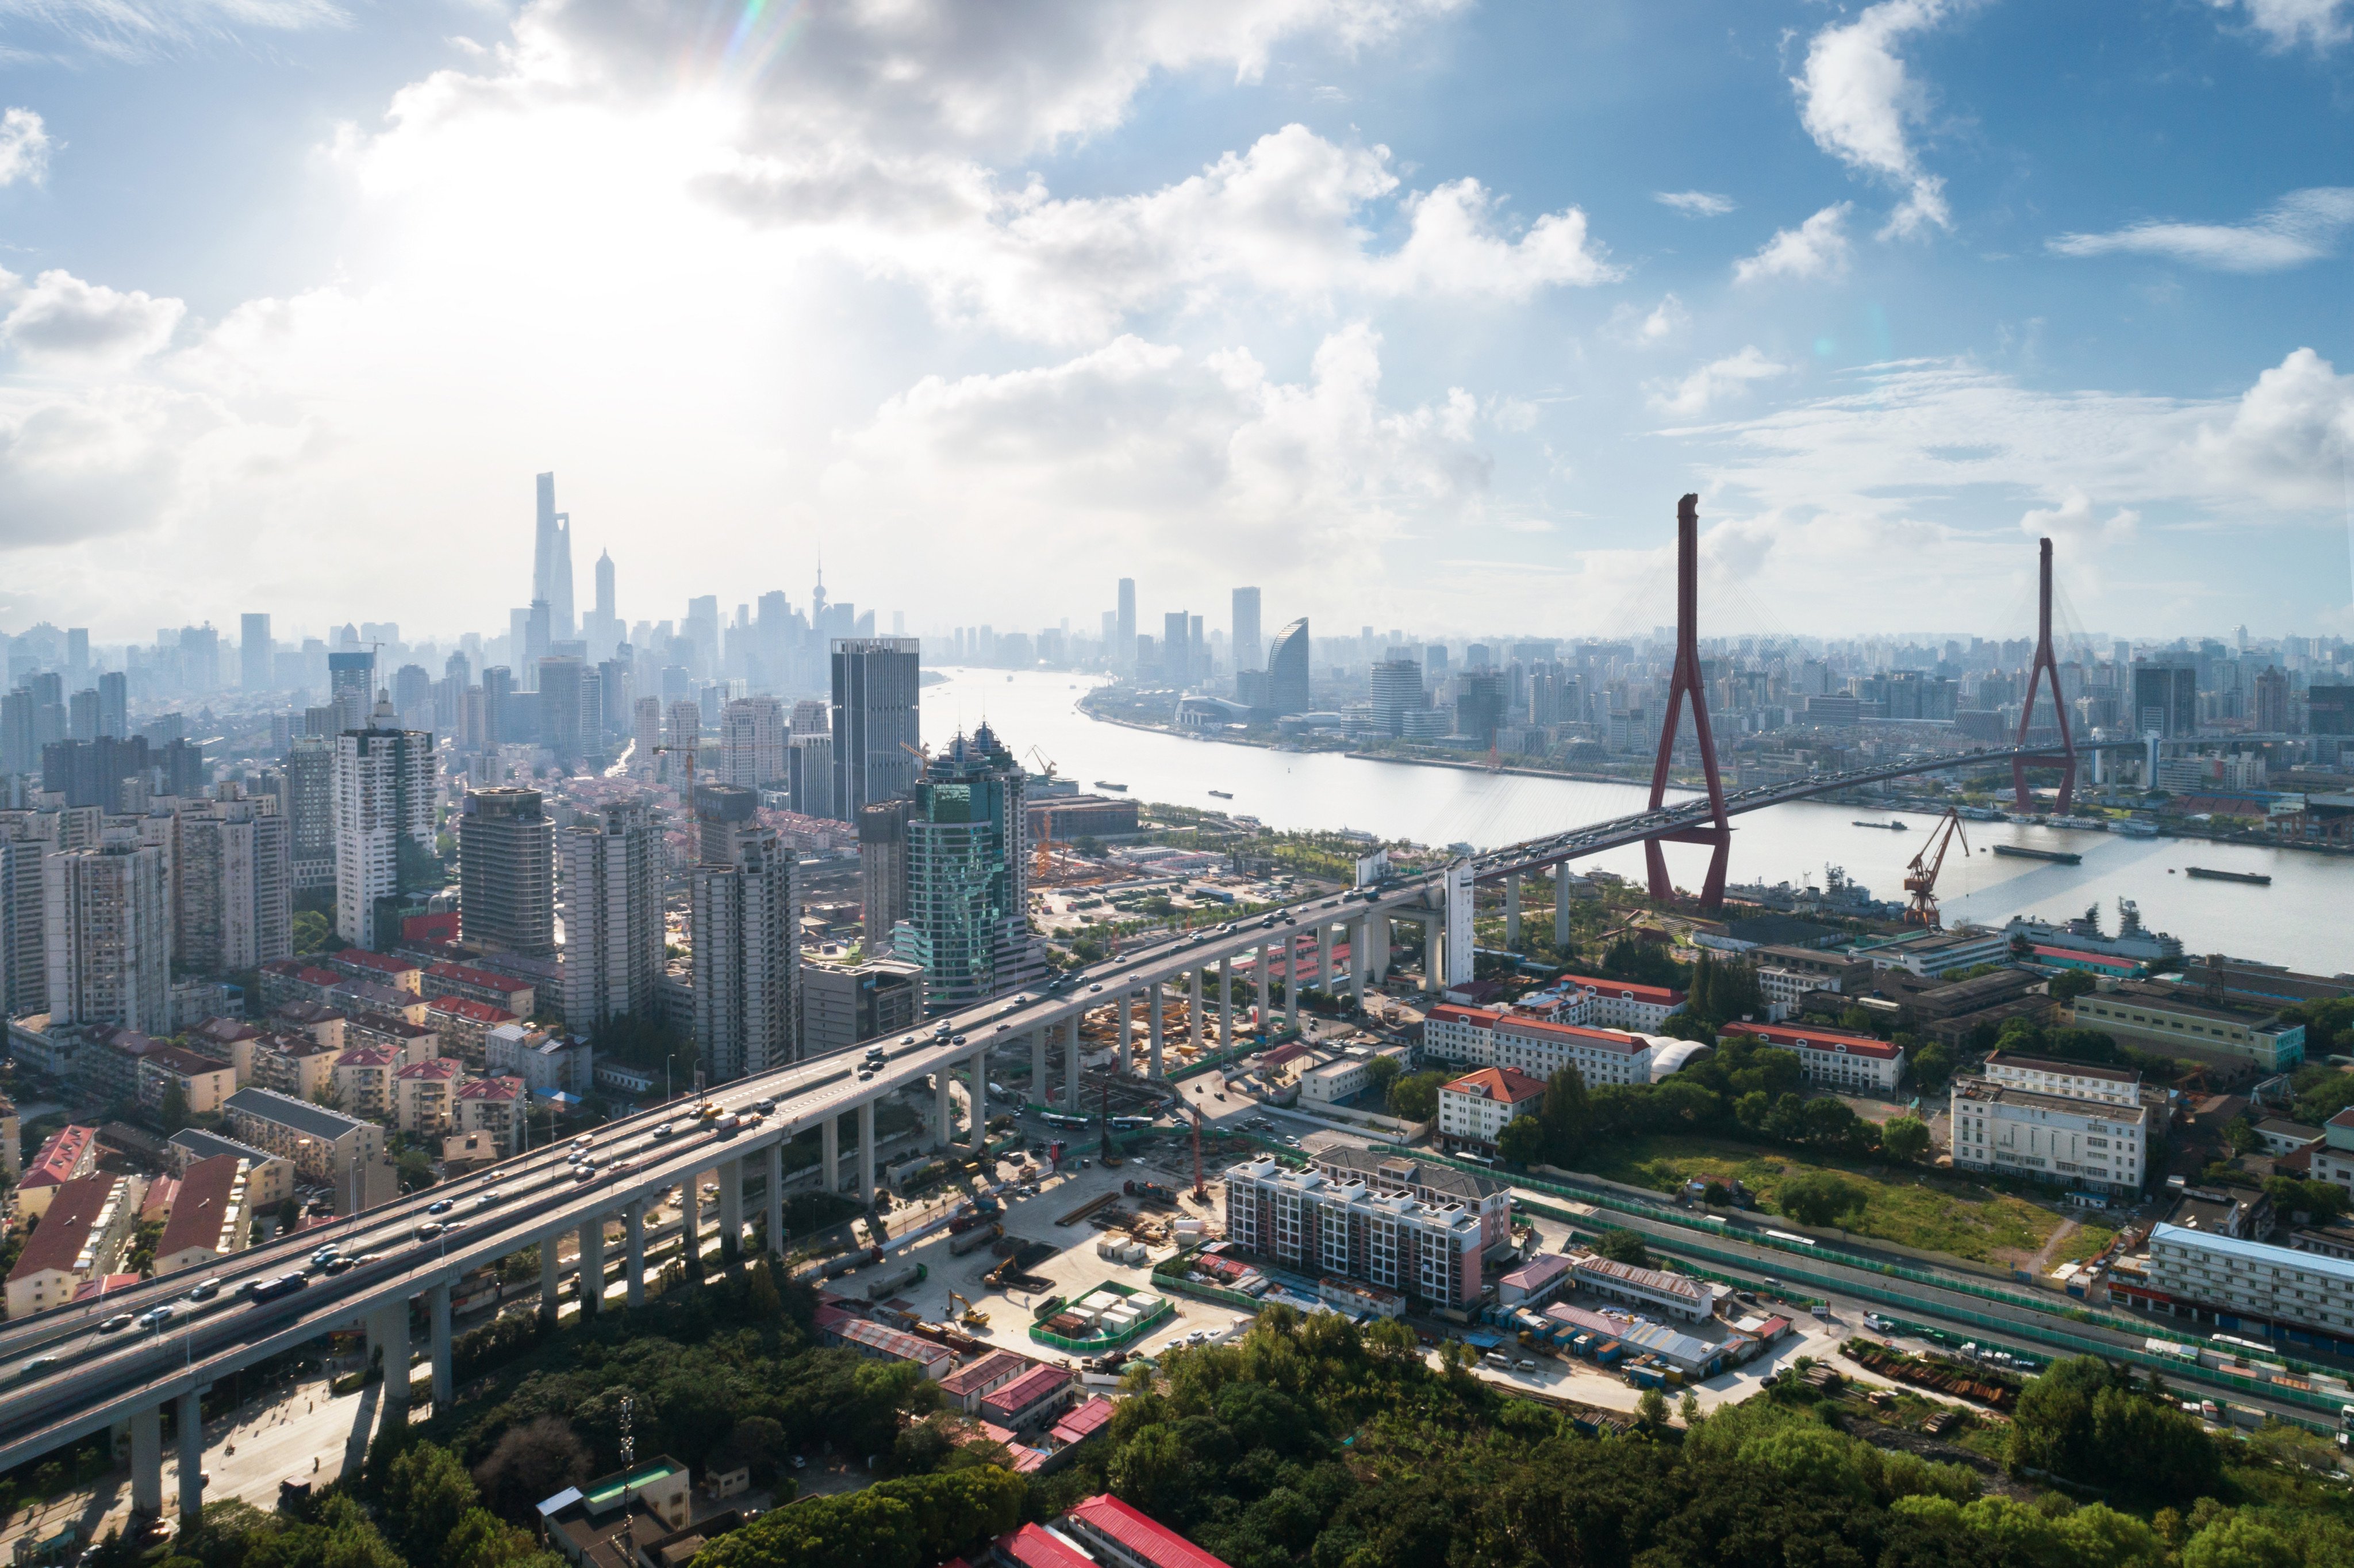 Once viewed as a ‘rust belt’ with industries like shipbuilding, textiles and power generation at its heart, Yangpu has evolved into an area driven by technology businesses. Photo: Shutterstock